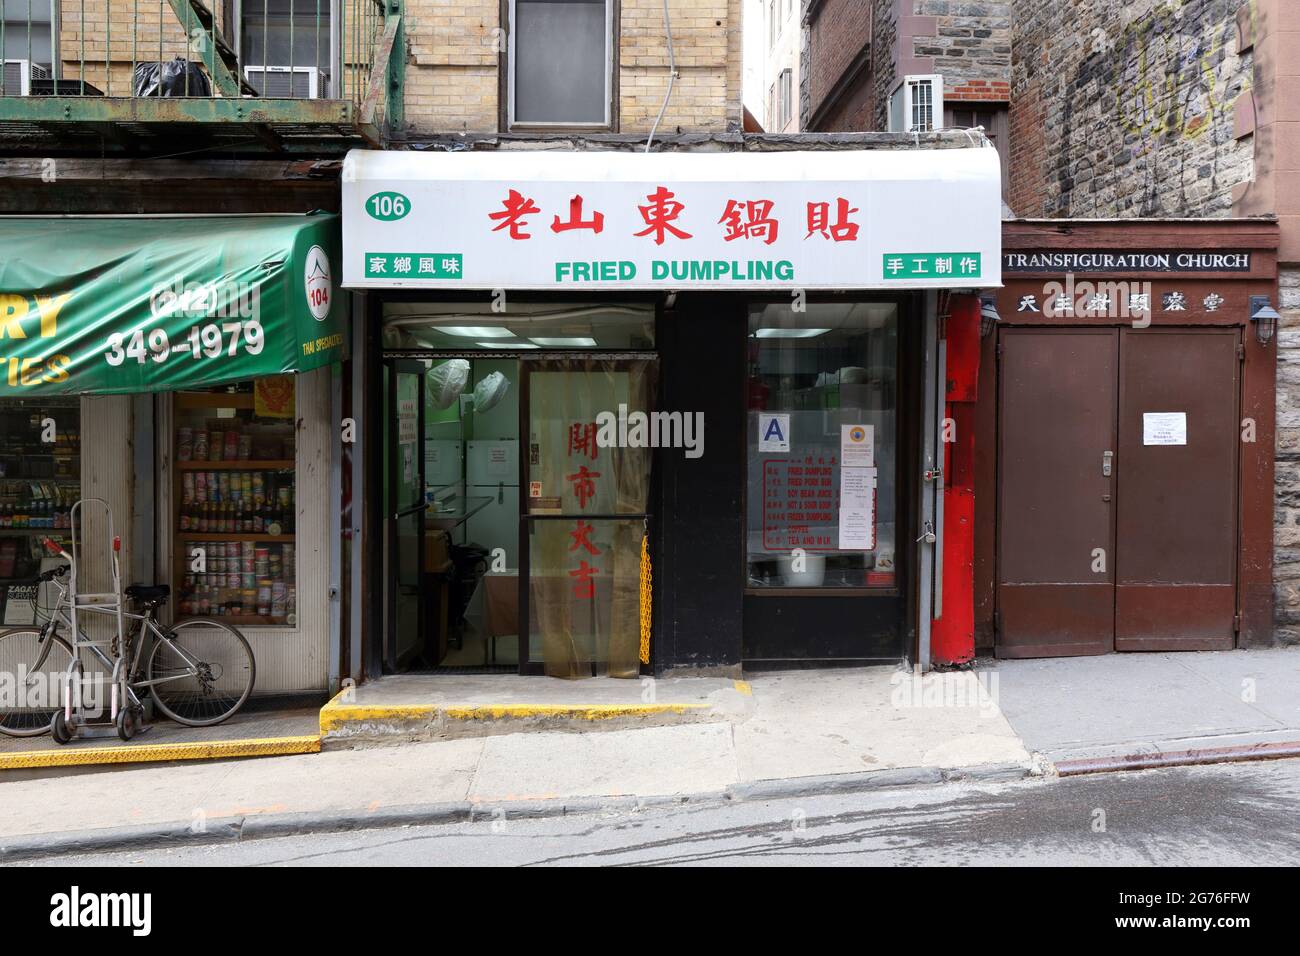 Fried Dumpling, 106 Mosco St, New York, NY. exterior storefront of a fried dumplings shop in Manhattan Chinatown. Stock Photo